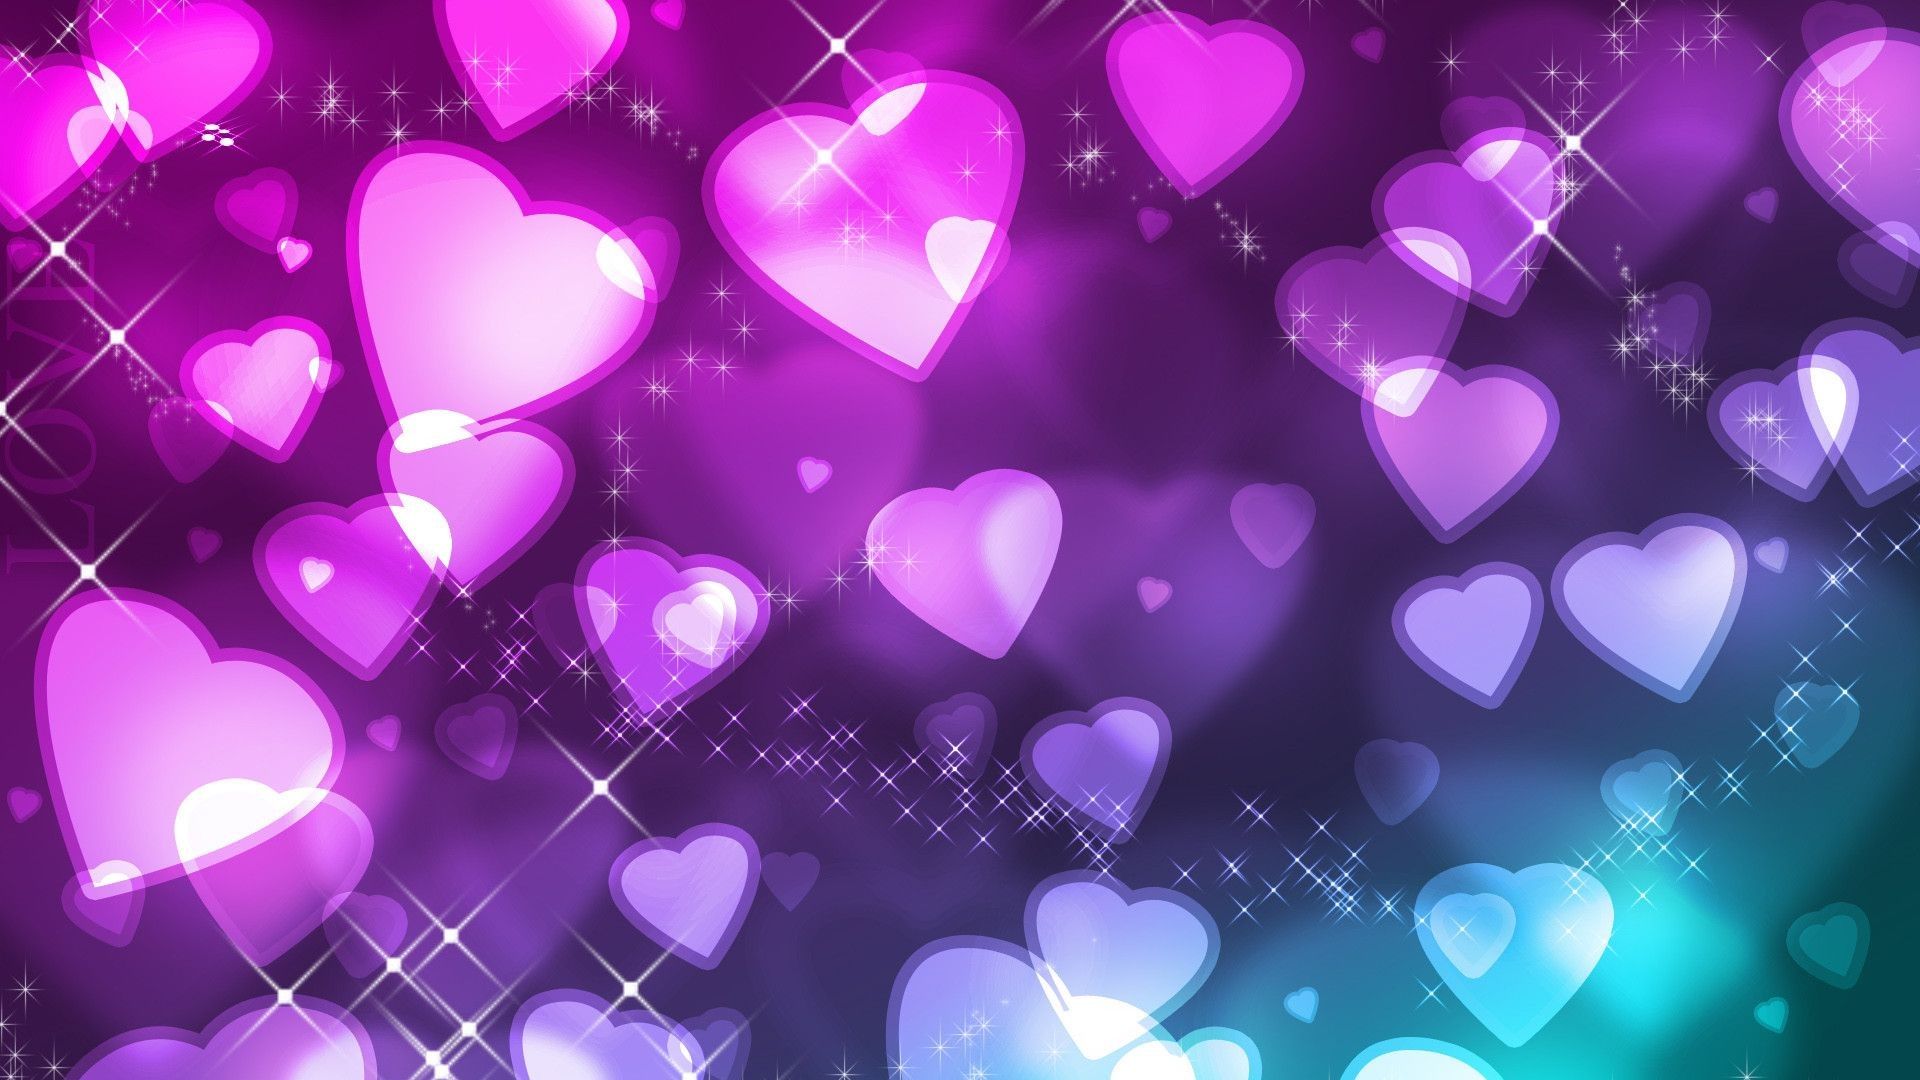 A purple and pink heart background with stars - Heart